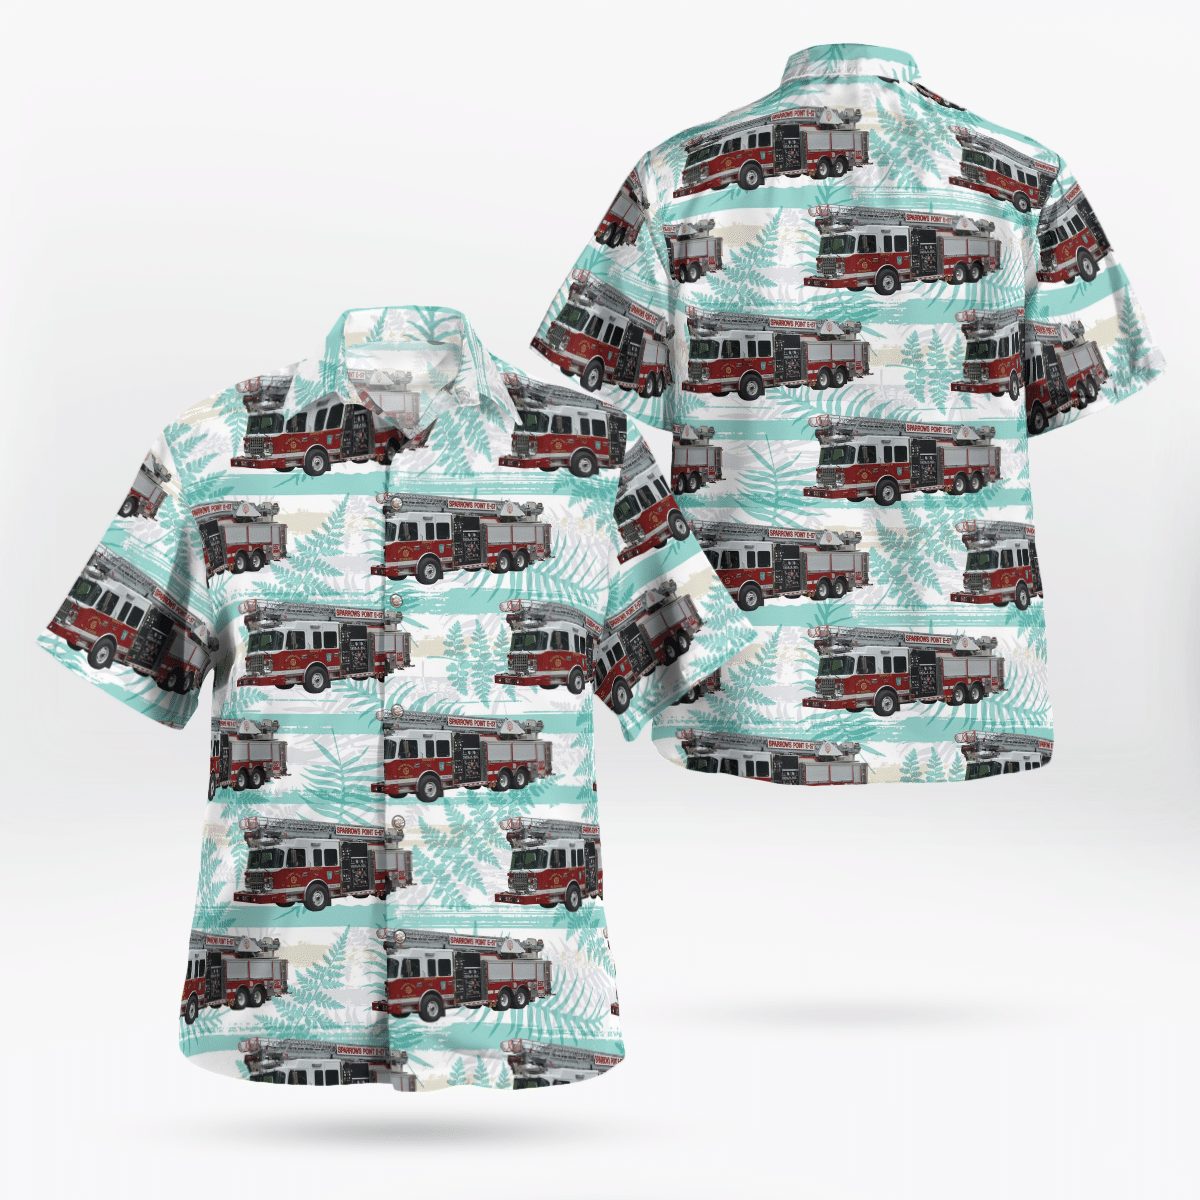 Shop now to find the perfect Hawaii Shirt for your hobby 26